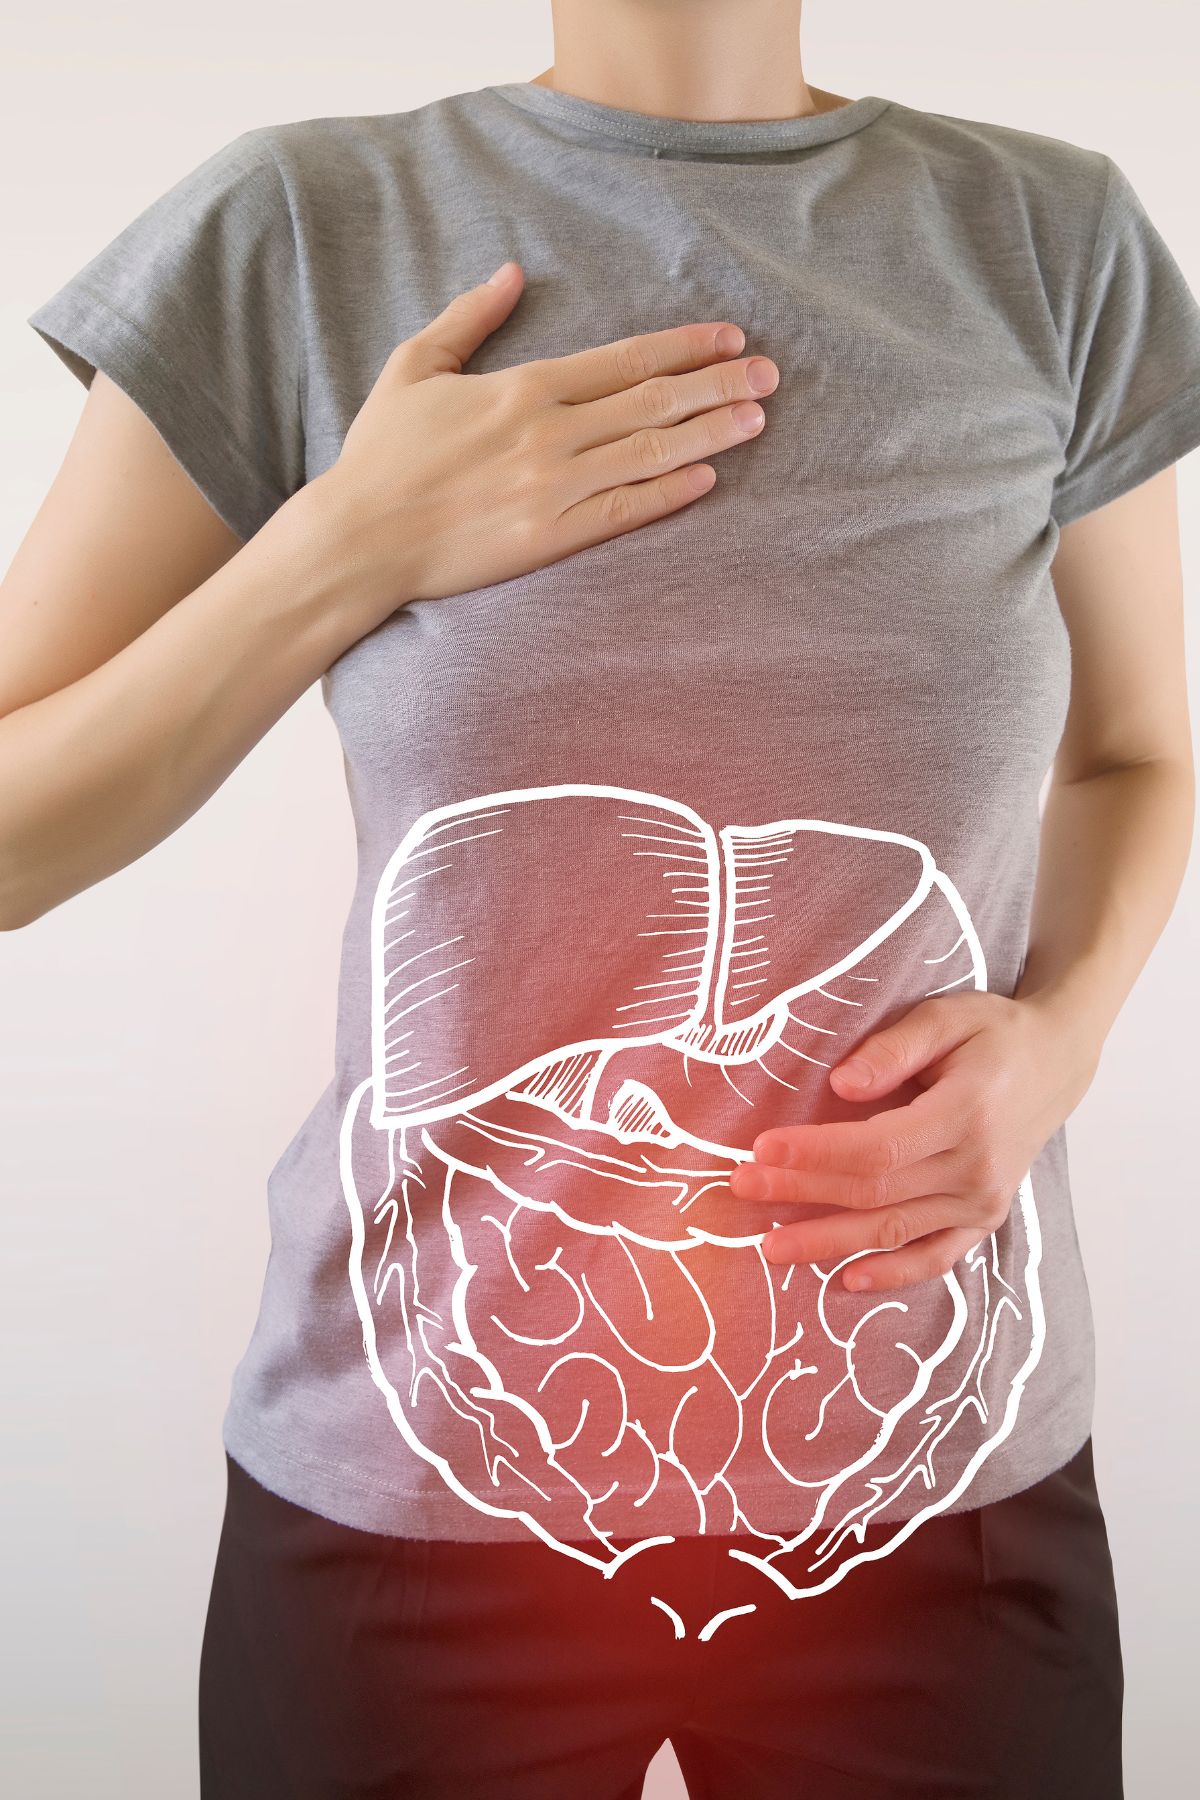 an illustration of a digestive tract on a photo of a woman holding her abdomen.  